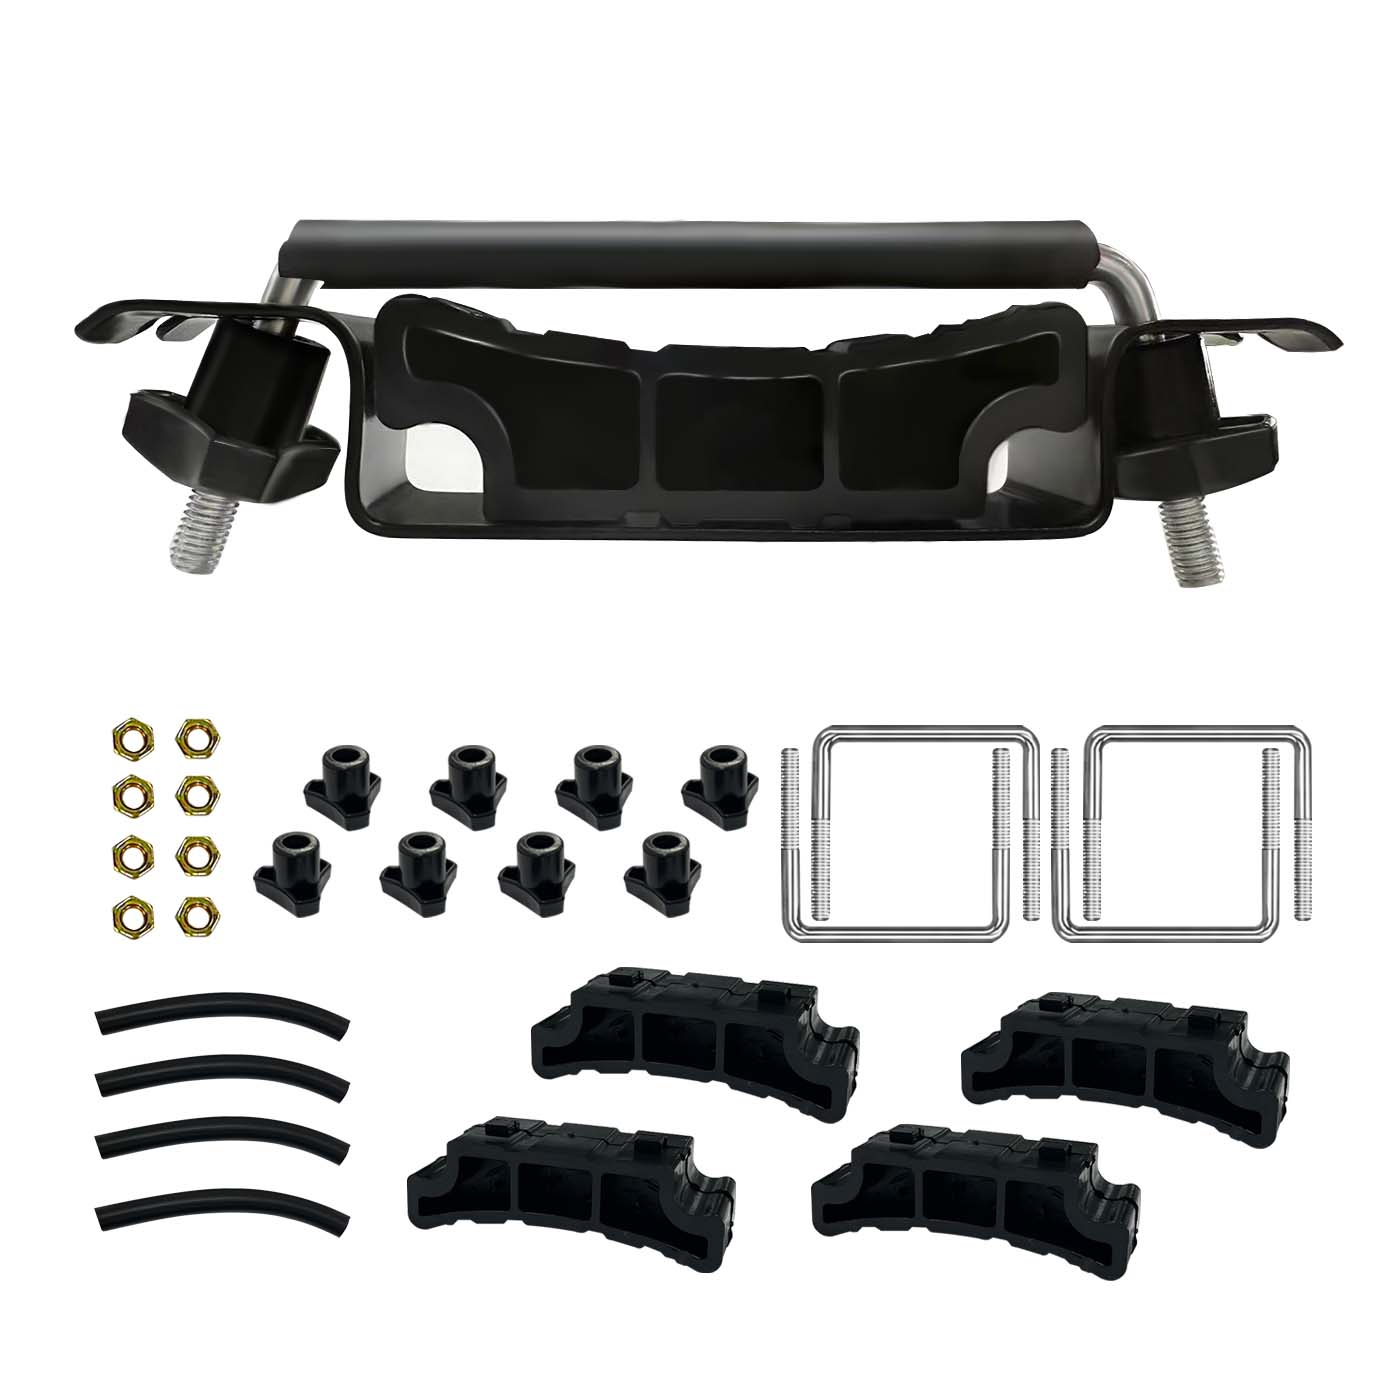 OPENROAD Roof Rack, assembled version  openroad4wd.com   